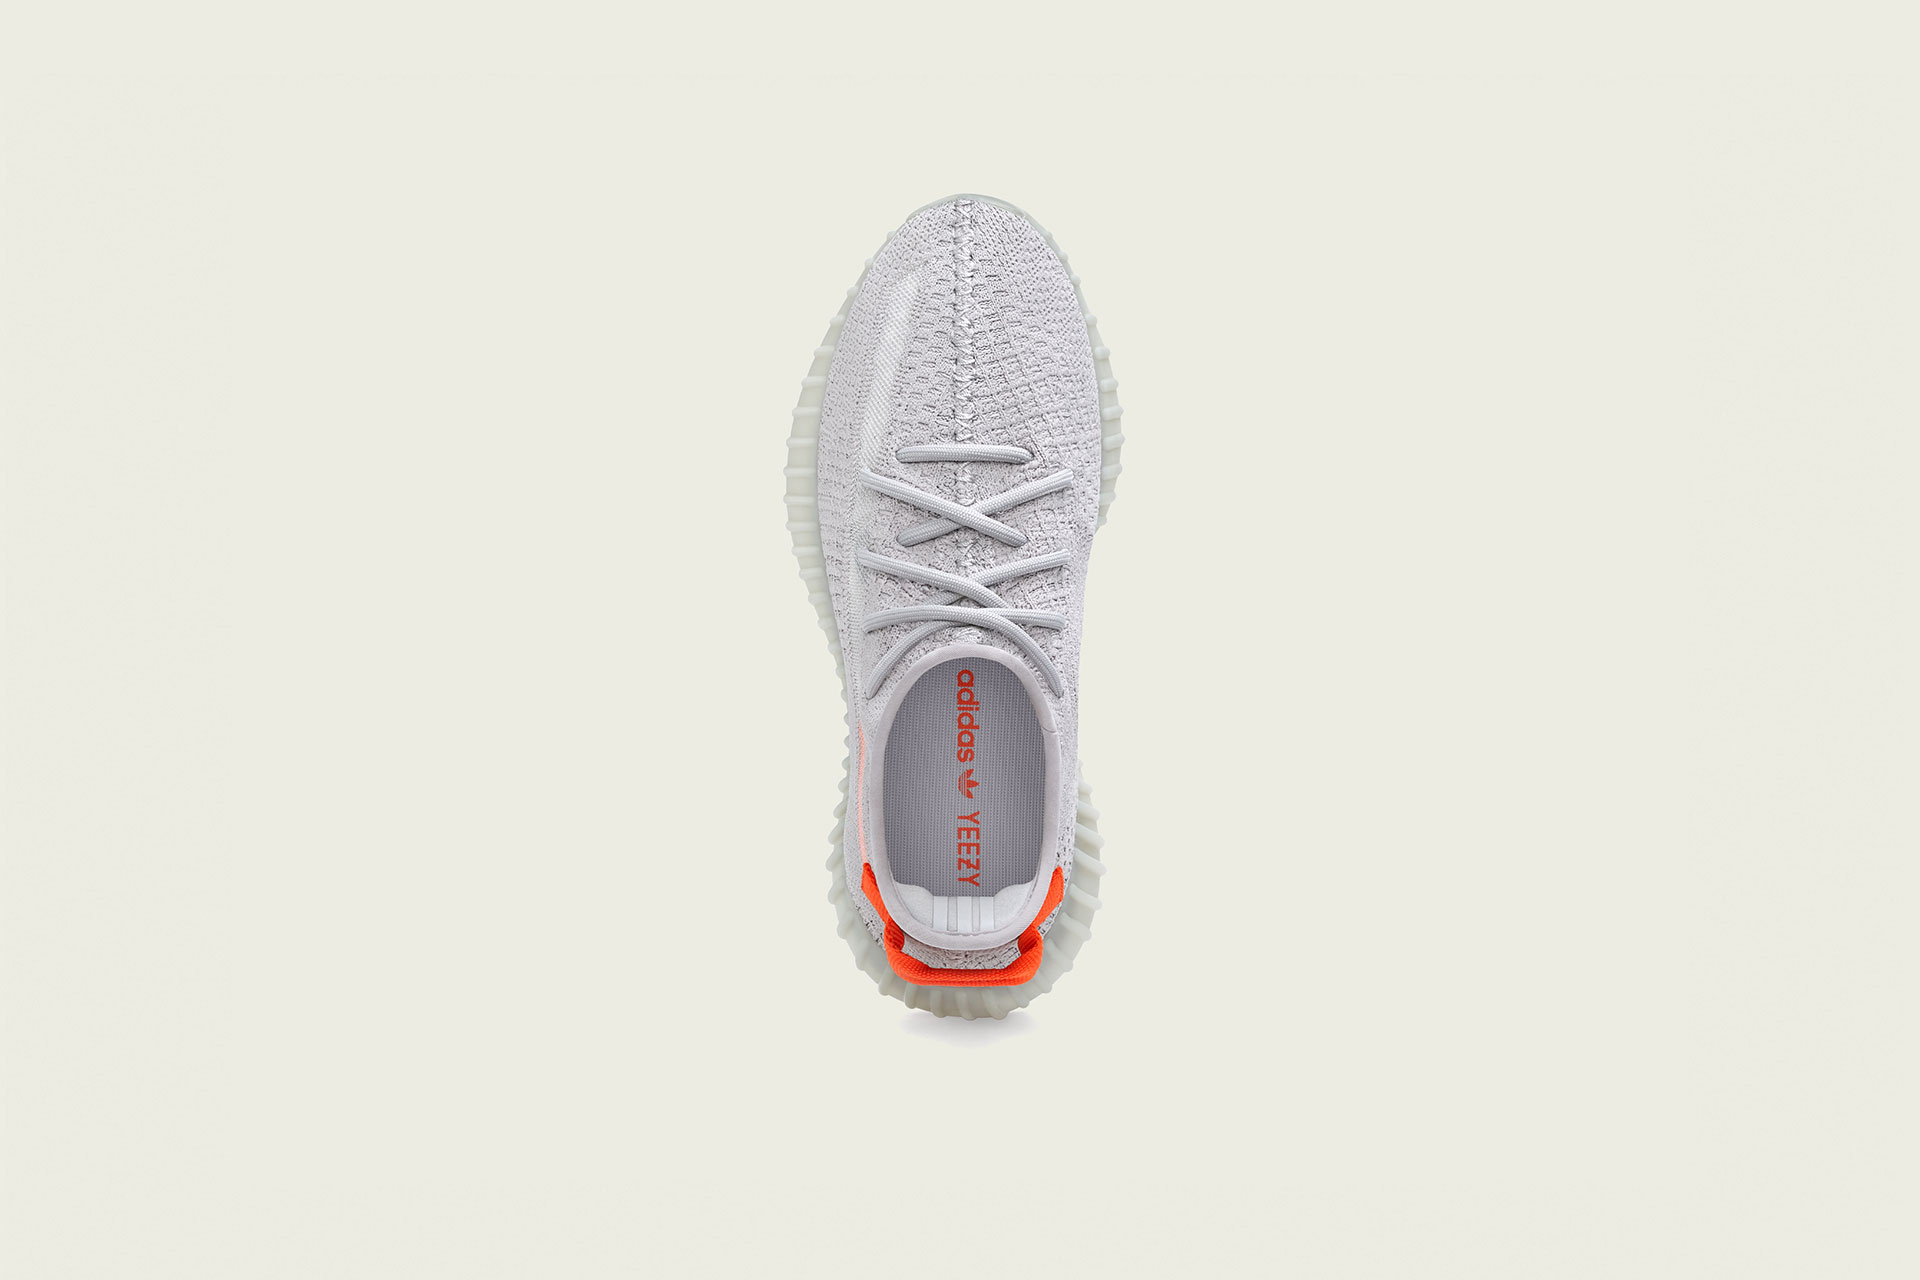 Terminal Kanin Ruin adidas Yeezy Boost 350 V2 - FX9017 - Tail Light - Footshop - Releases